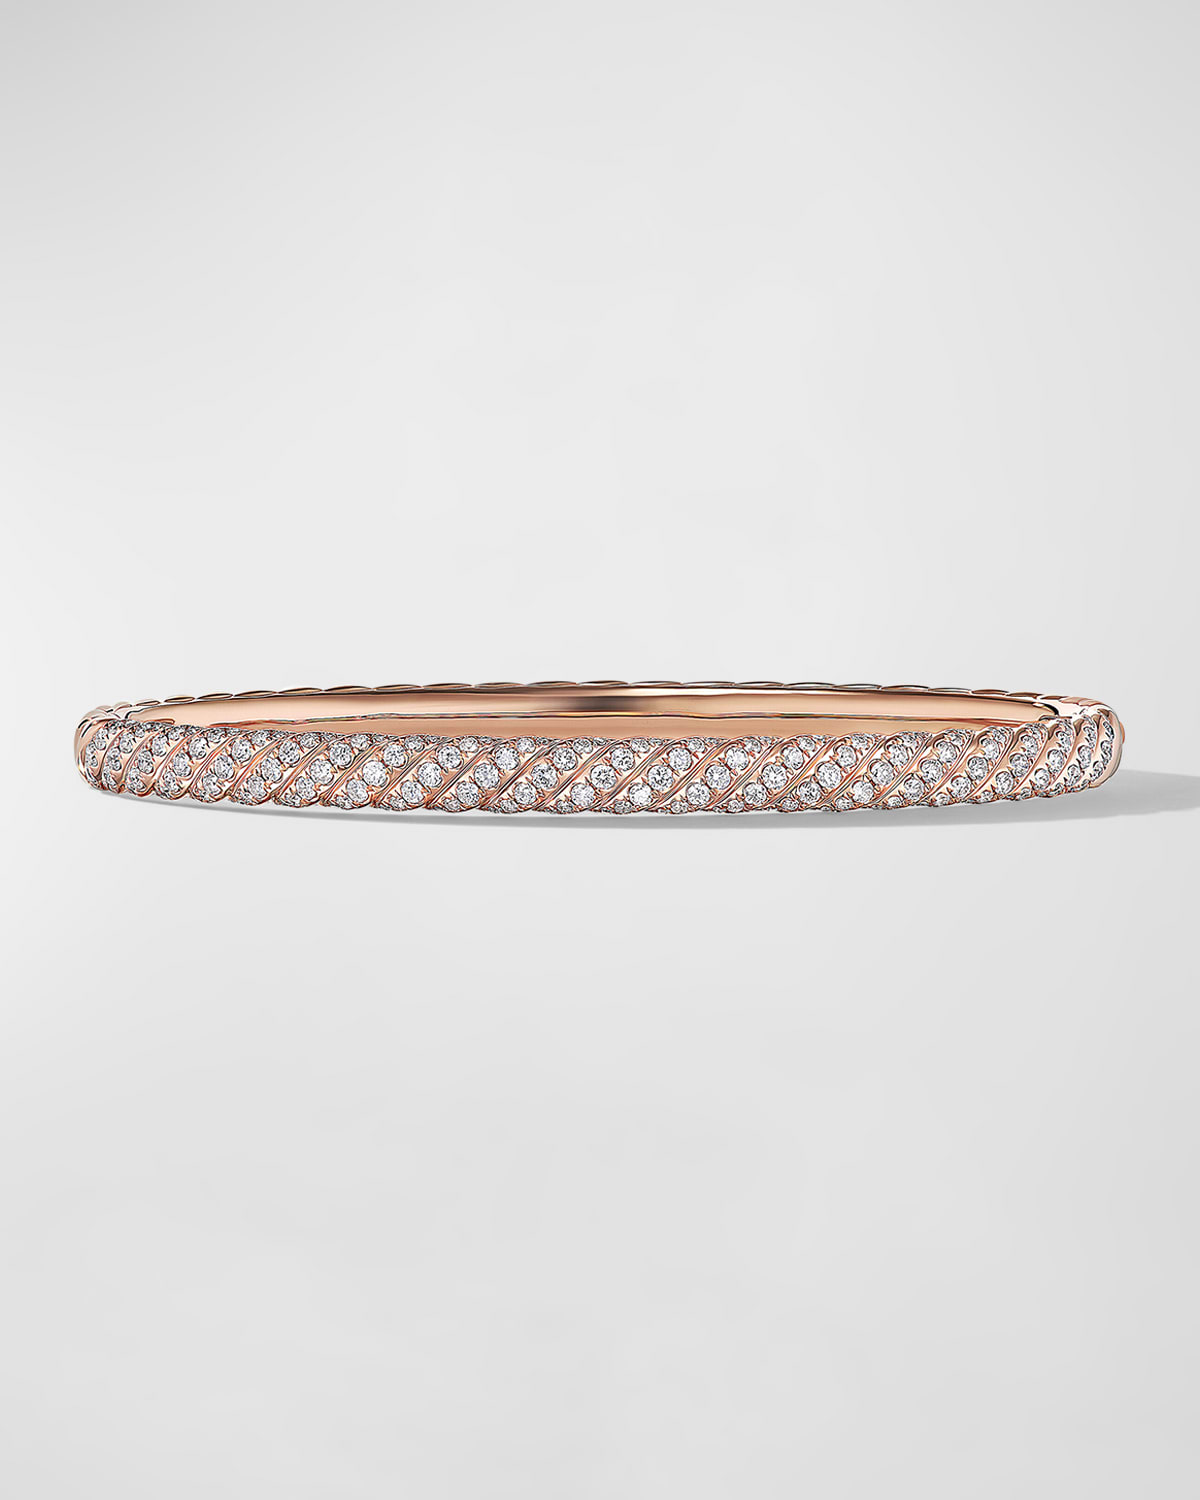 David Yurman Sculpted Cable Bracelet with Diamonds in 18K Rose Gold, 4.5mm, Size M